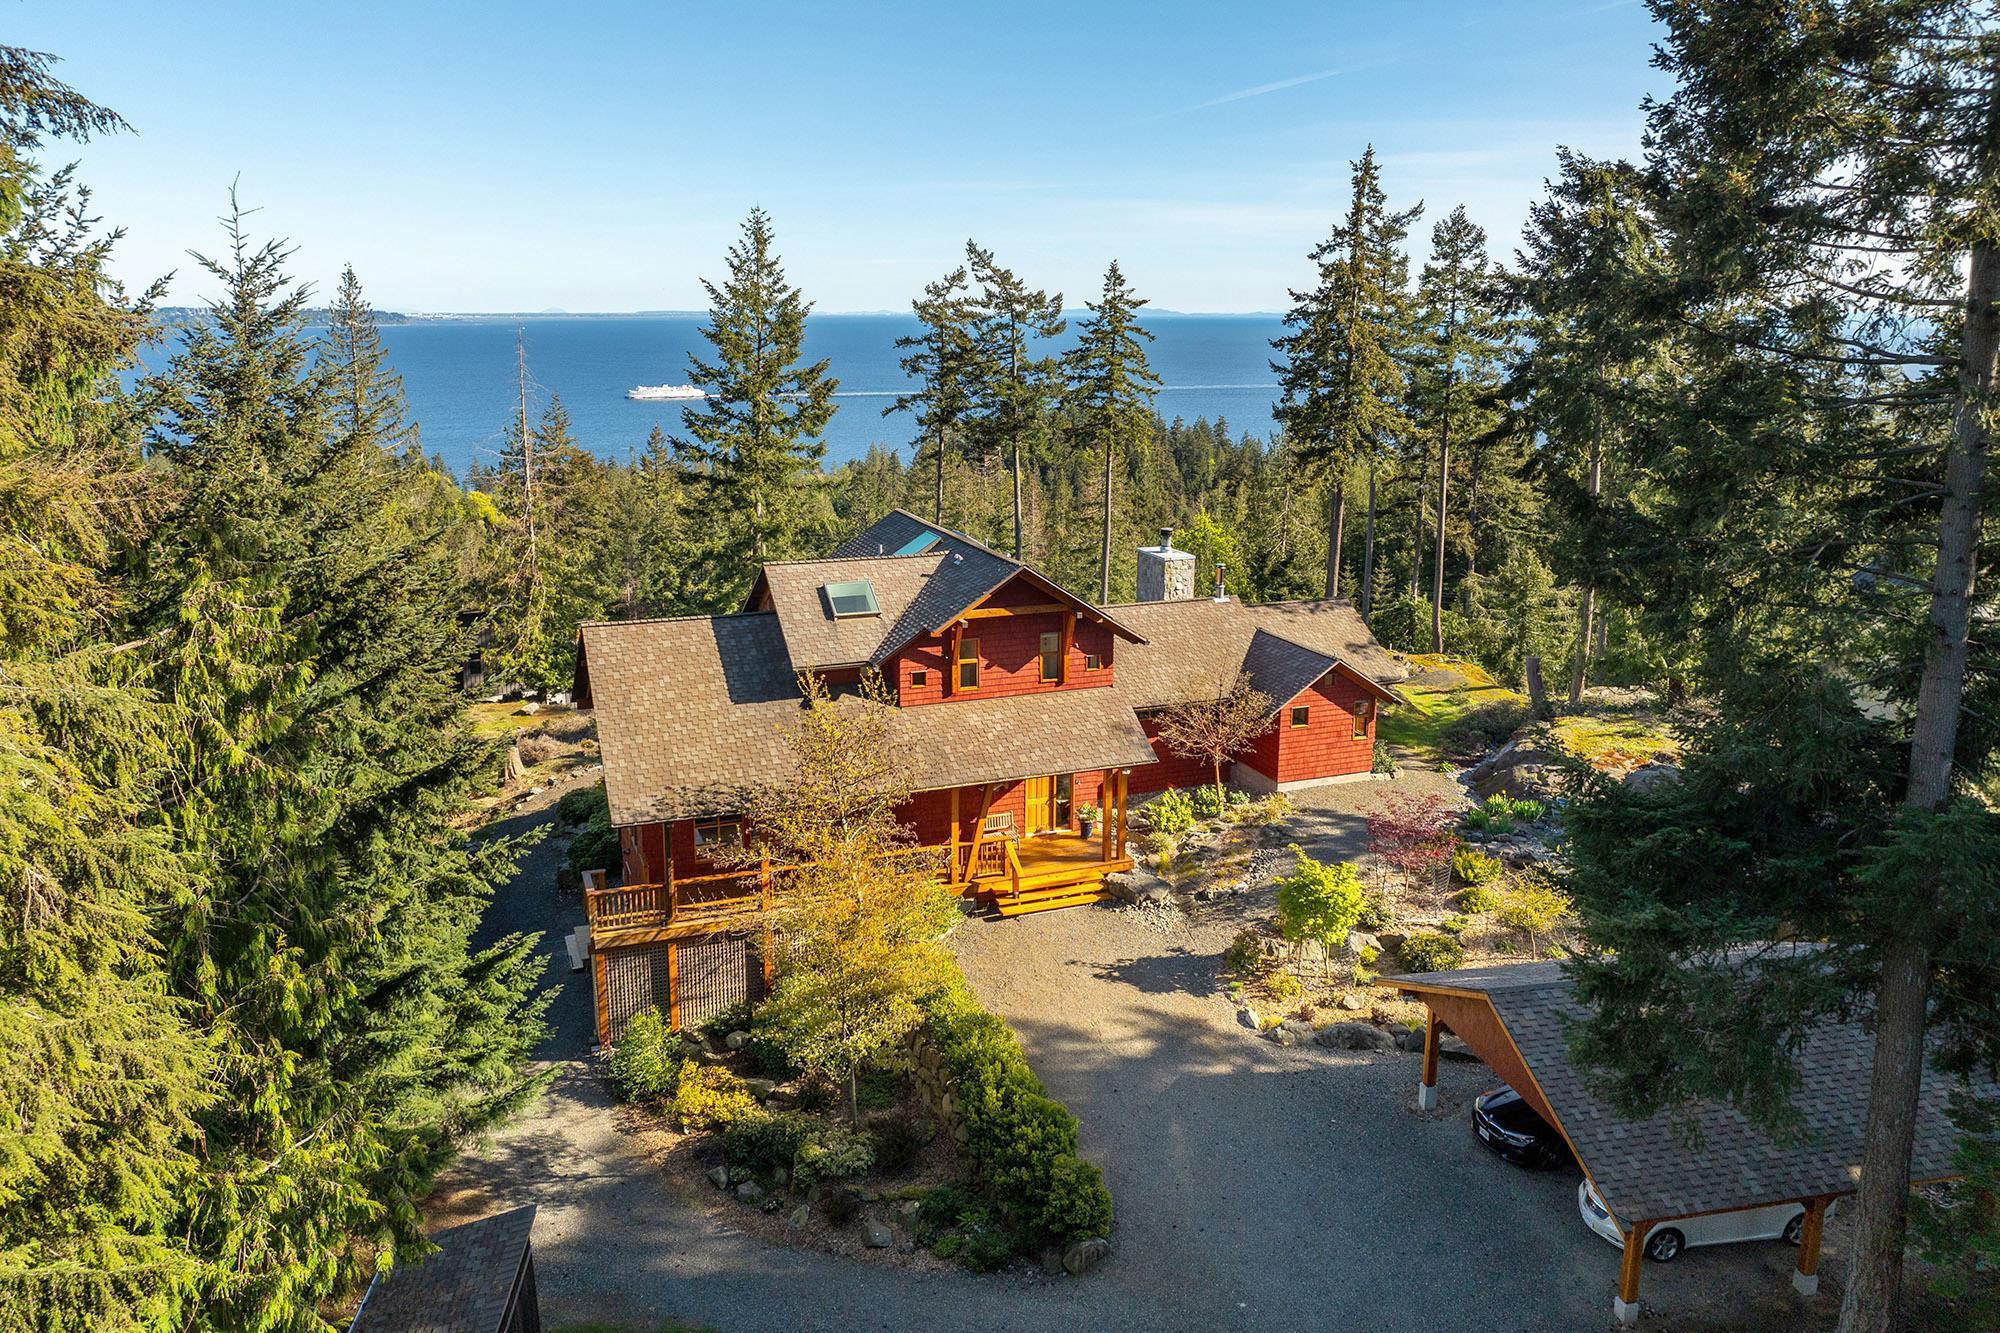 Listing image of 1004 COWAN POINT DRIVE